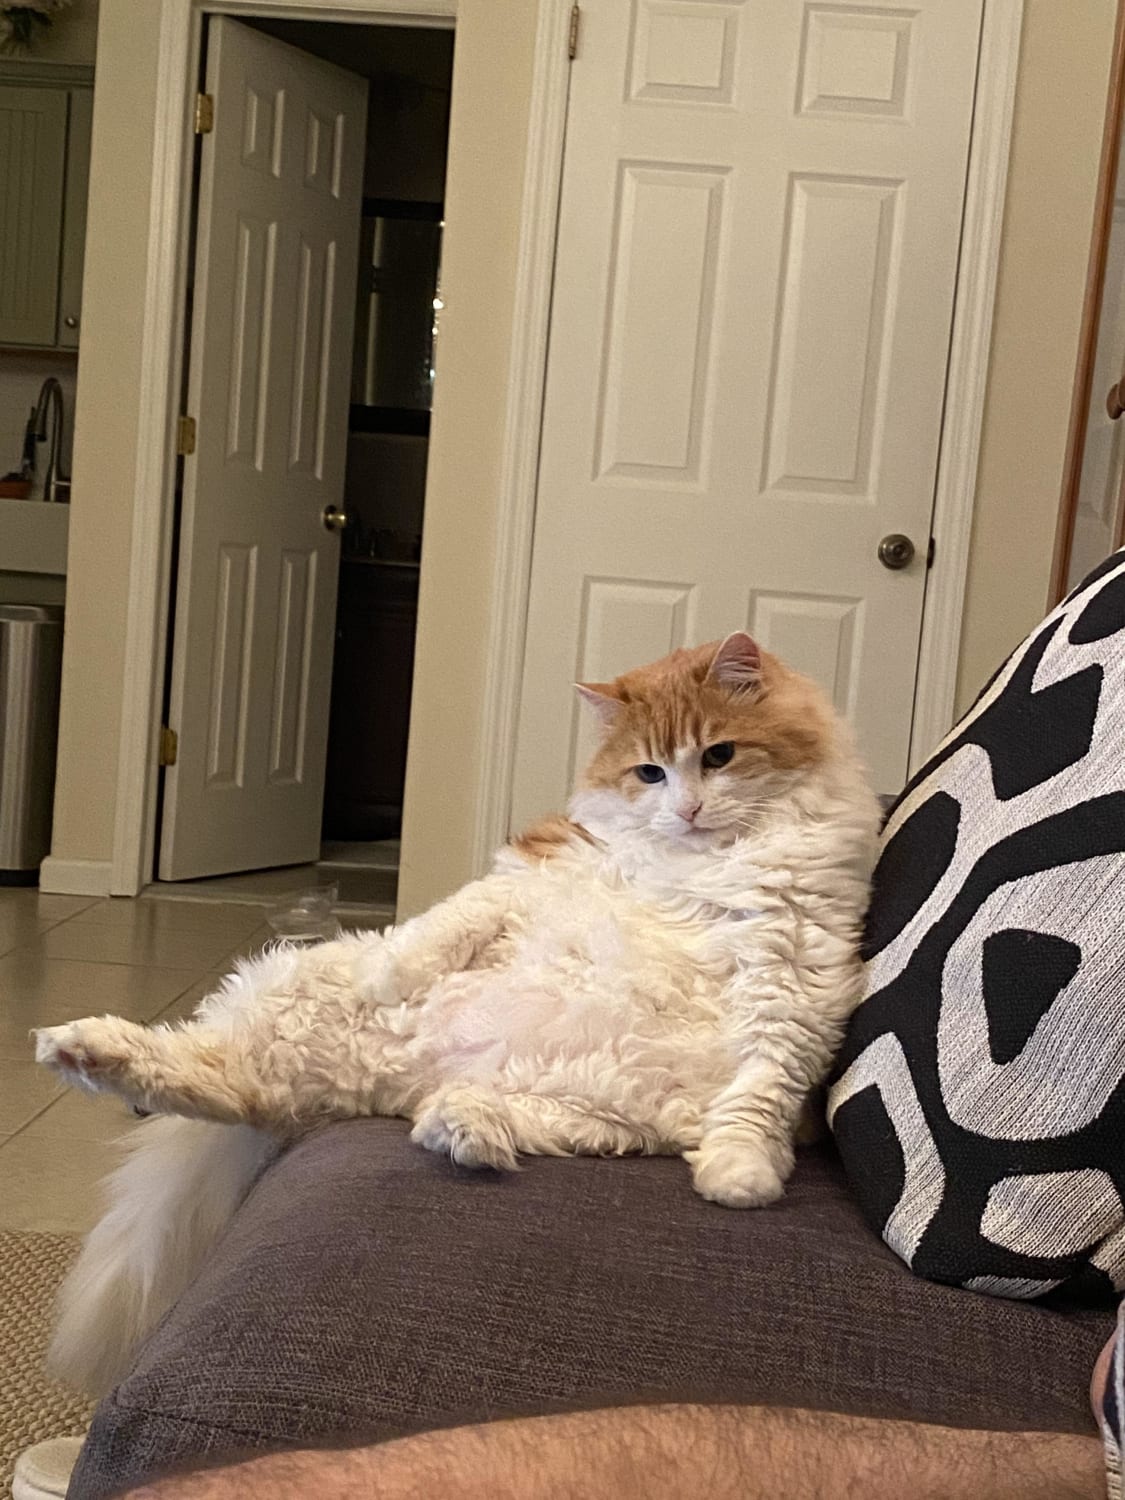 My 10 year old thicc girl we adopted last year just chilling after she became comfy with us